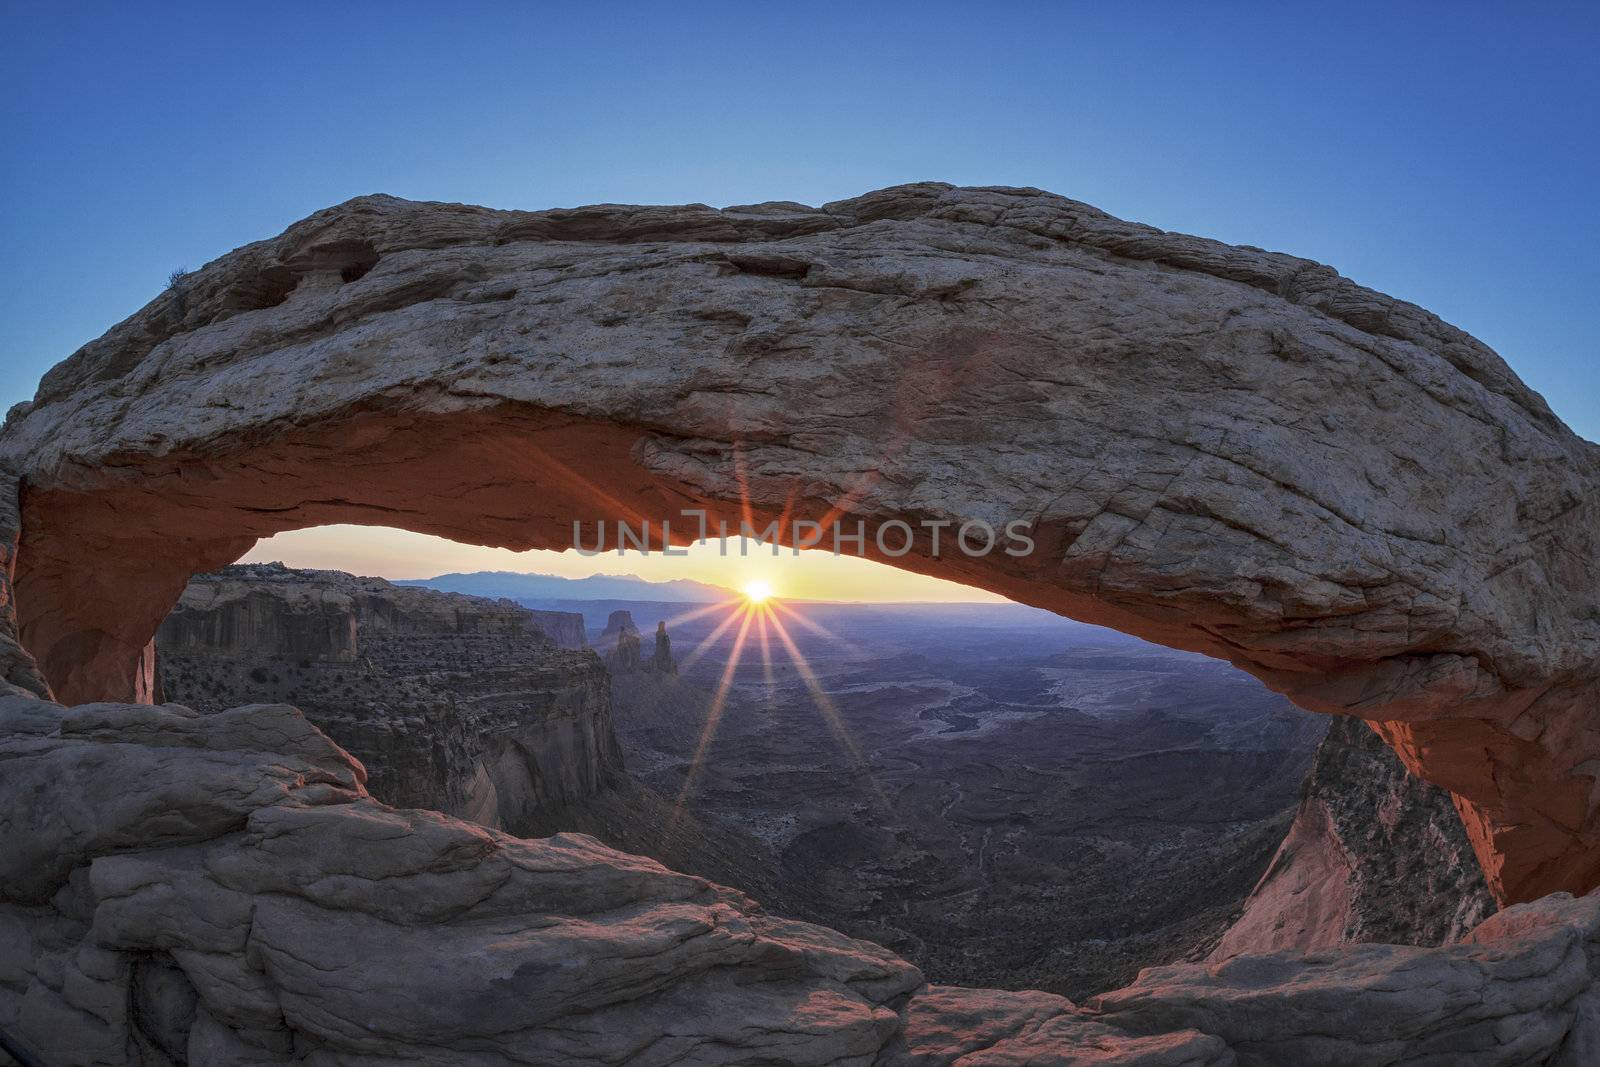 Famous sunrise at Mesa Arch in Canyonlands National Park, Utah, USA 